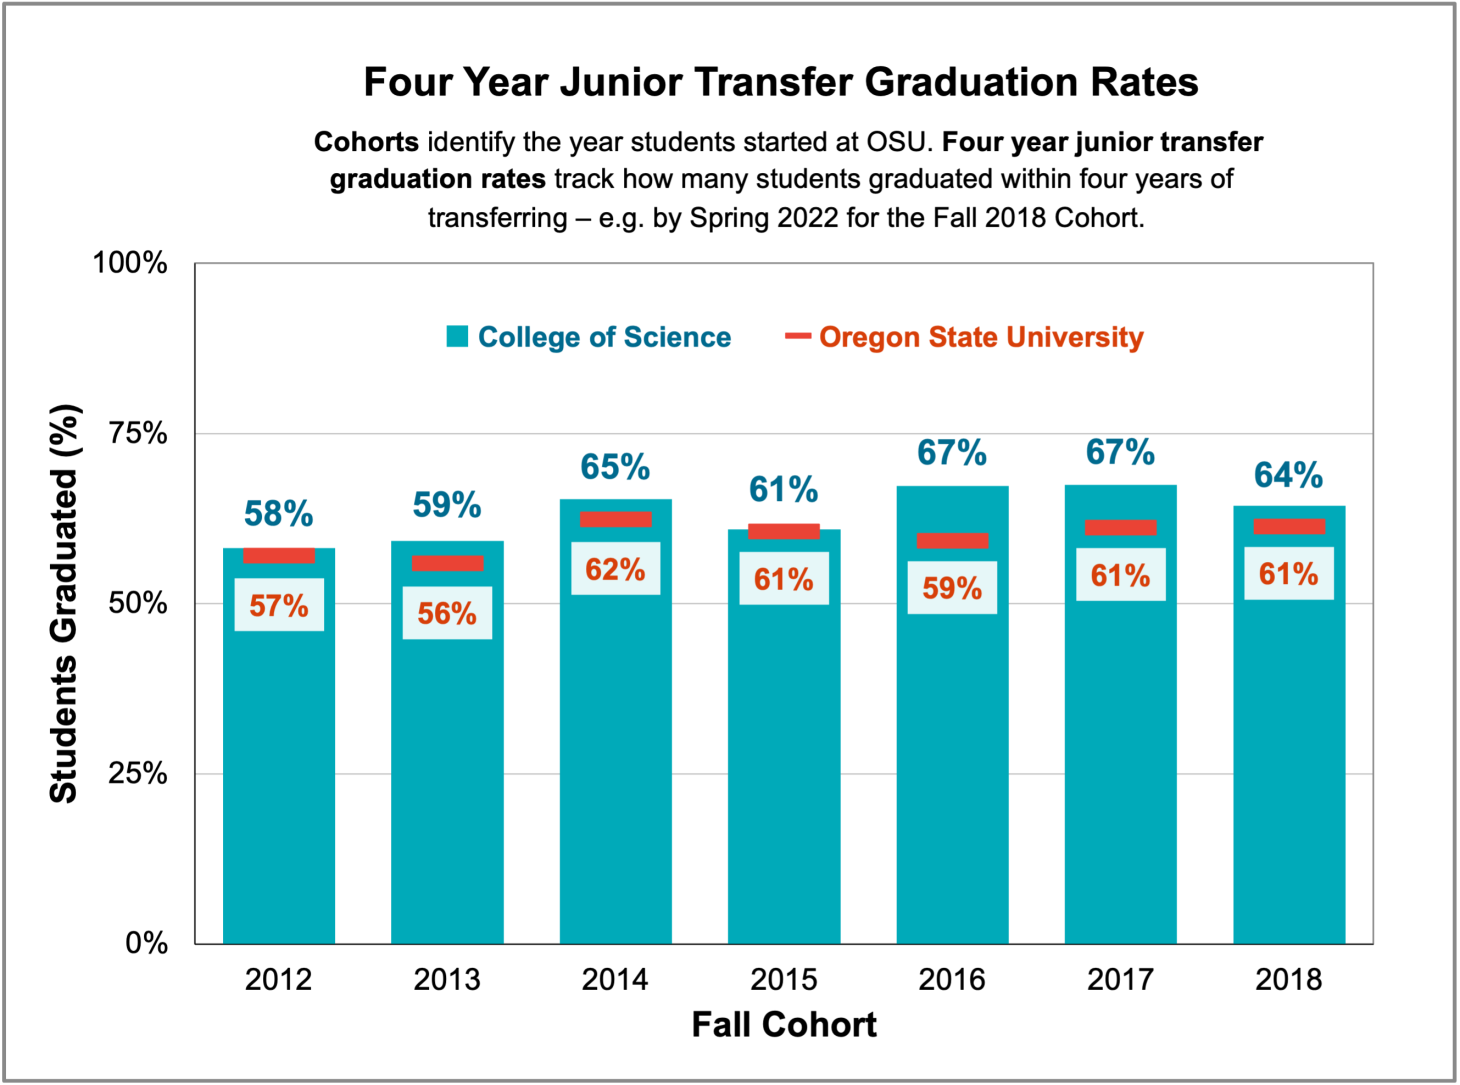 Graph showing the percent of junior transfer students who graduated within four years of transferring to the College of Science and to Oregon State University. More details are available below, under Chart 3.4.1 Four Year Junior Transfer Graduation Rates.